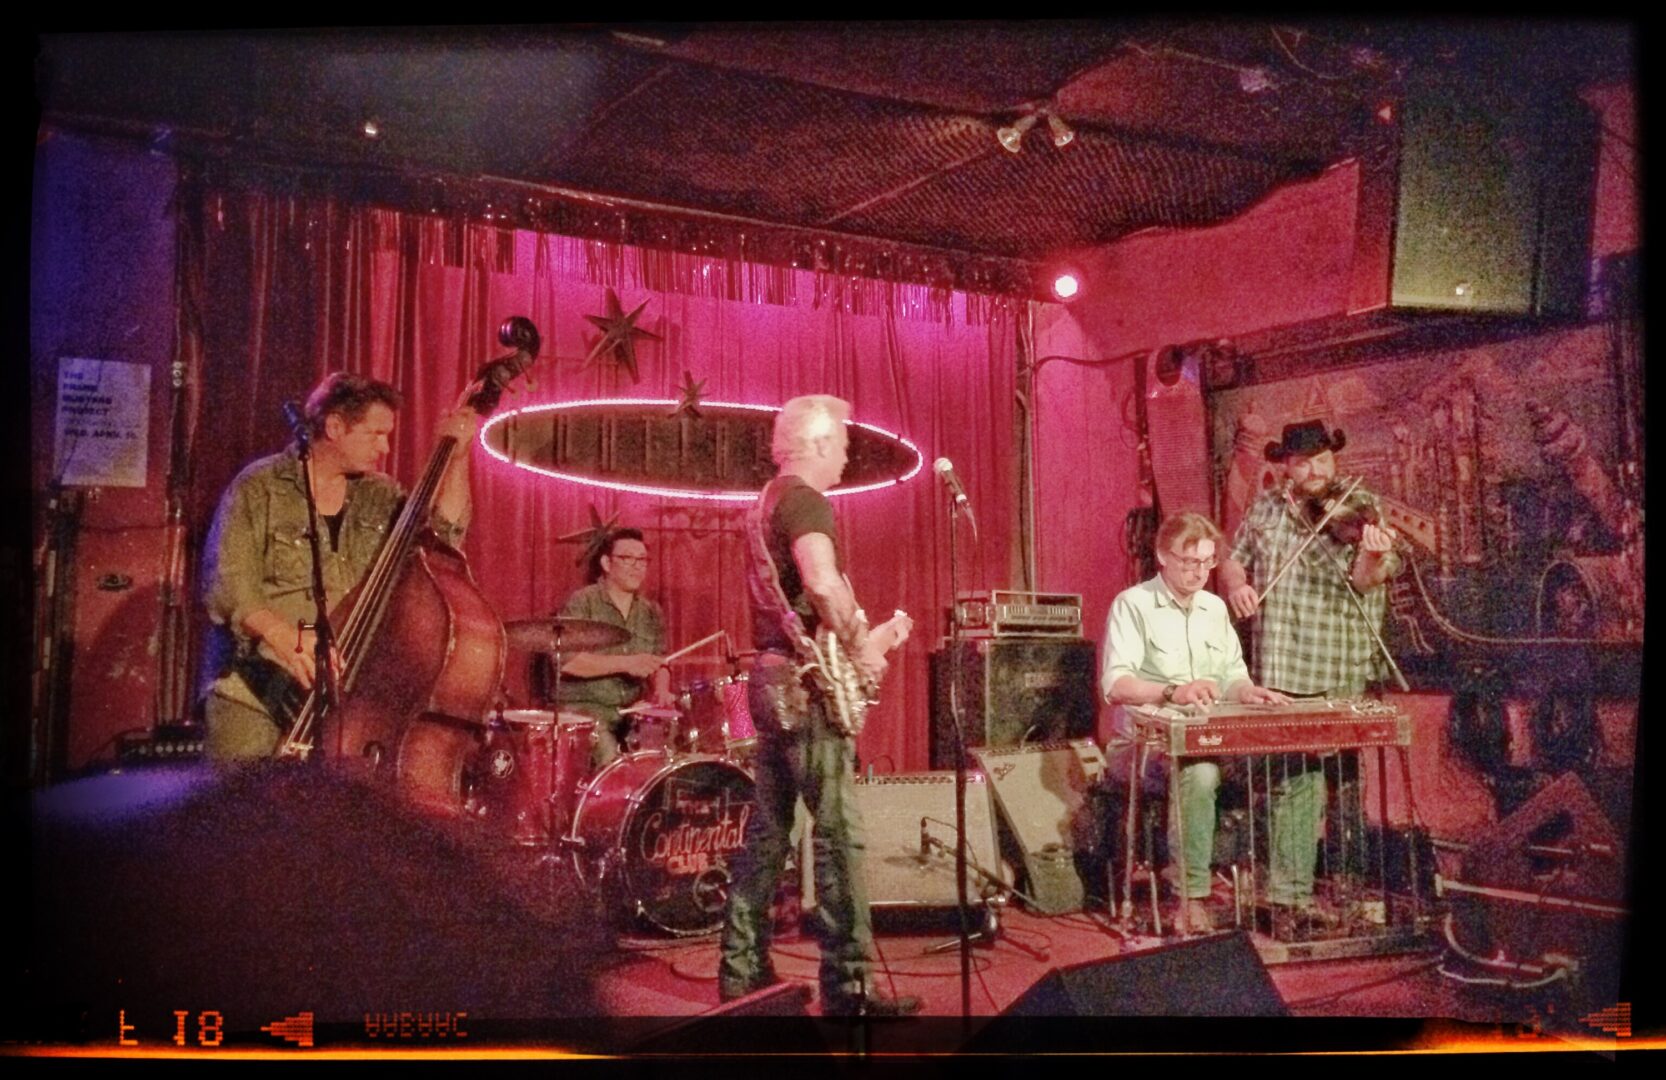 A group of people playing music in a bar.